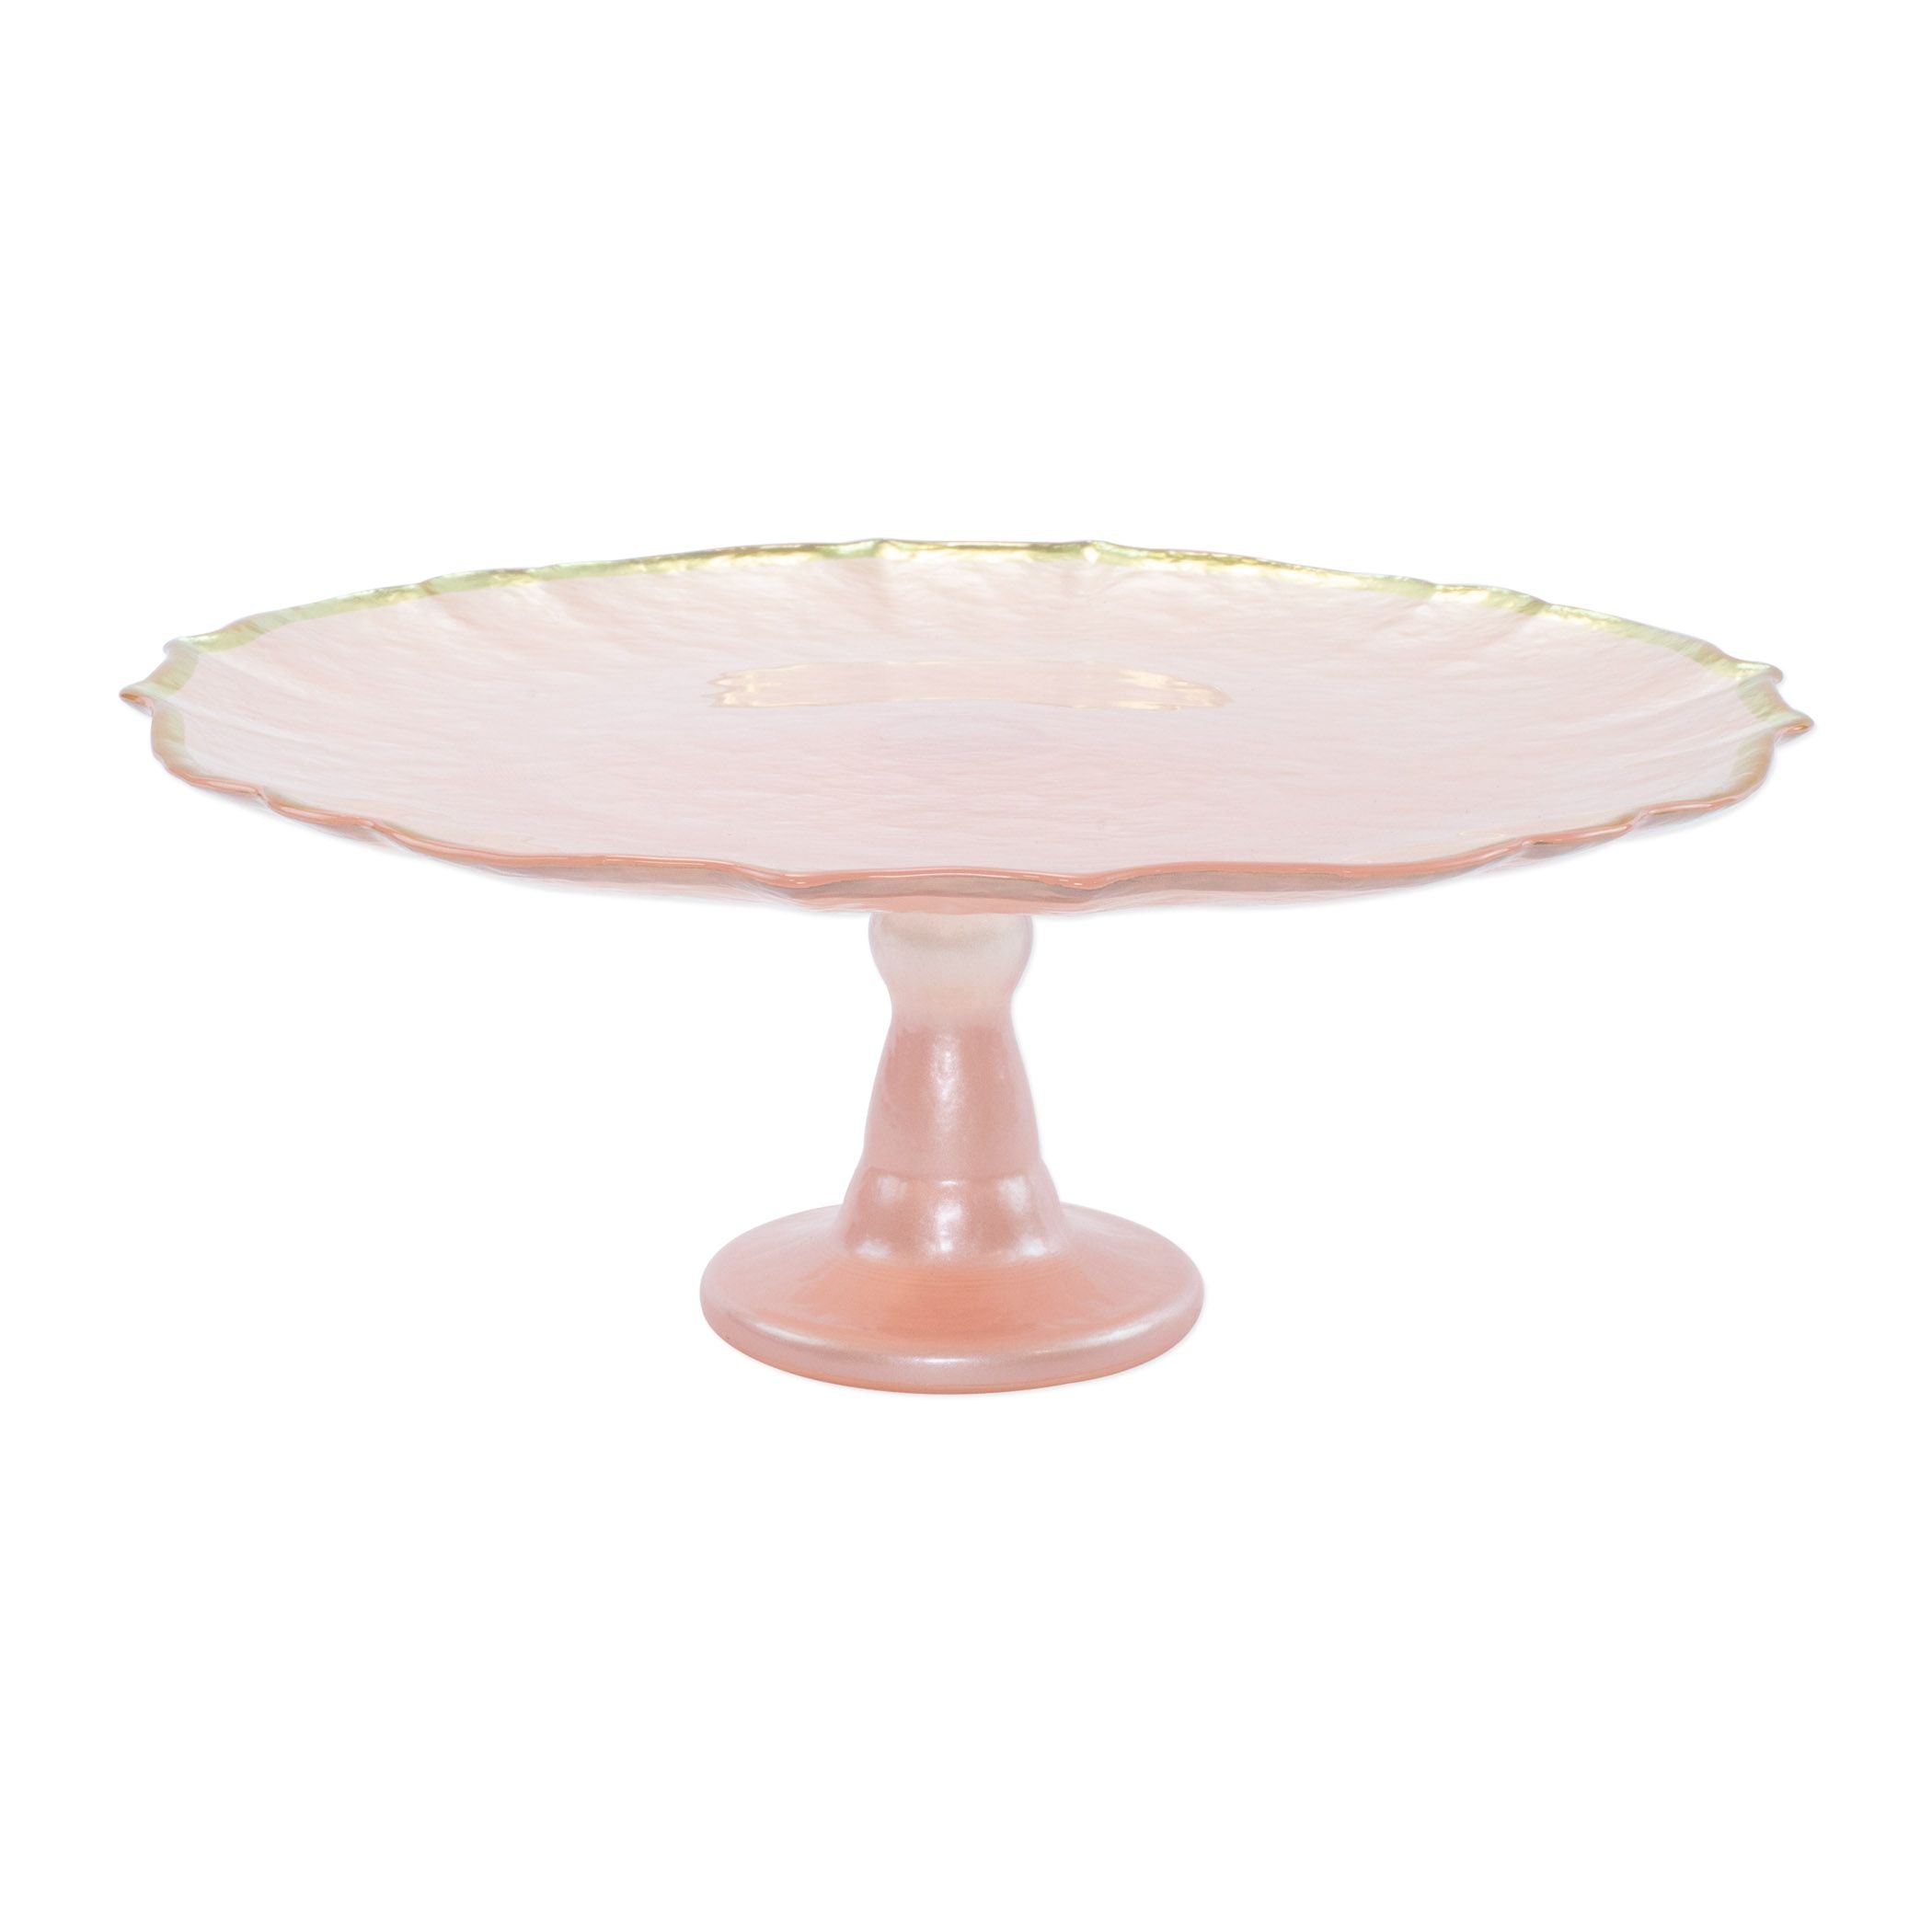 BAROQUE GLASS CAKE STAND PINK